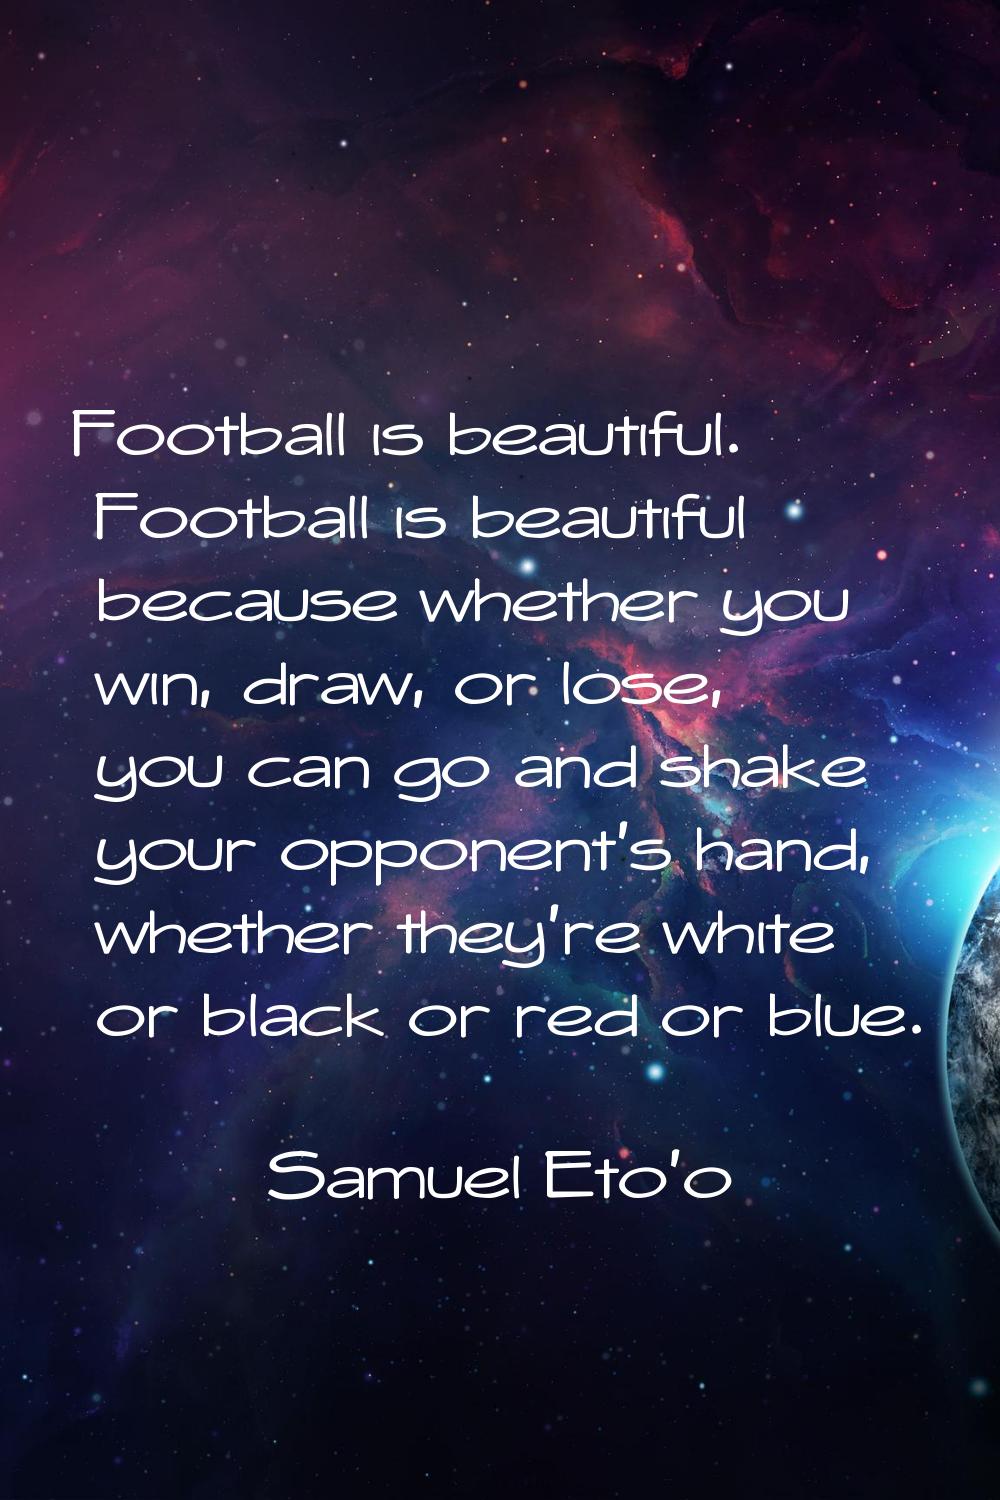 Football is beautiful. Football is beautiful because whether you win, draw, or lose, you can go and